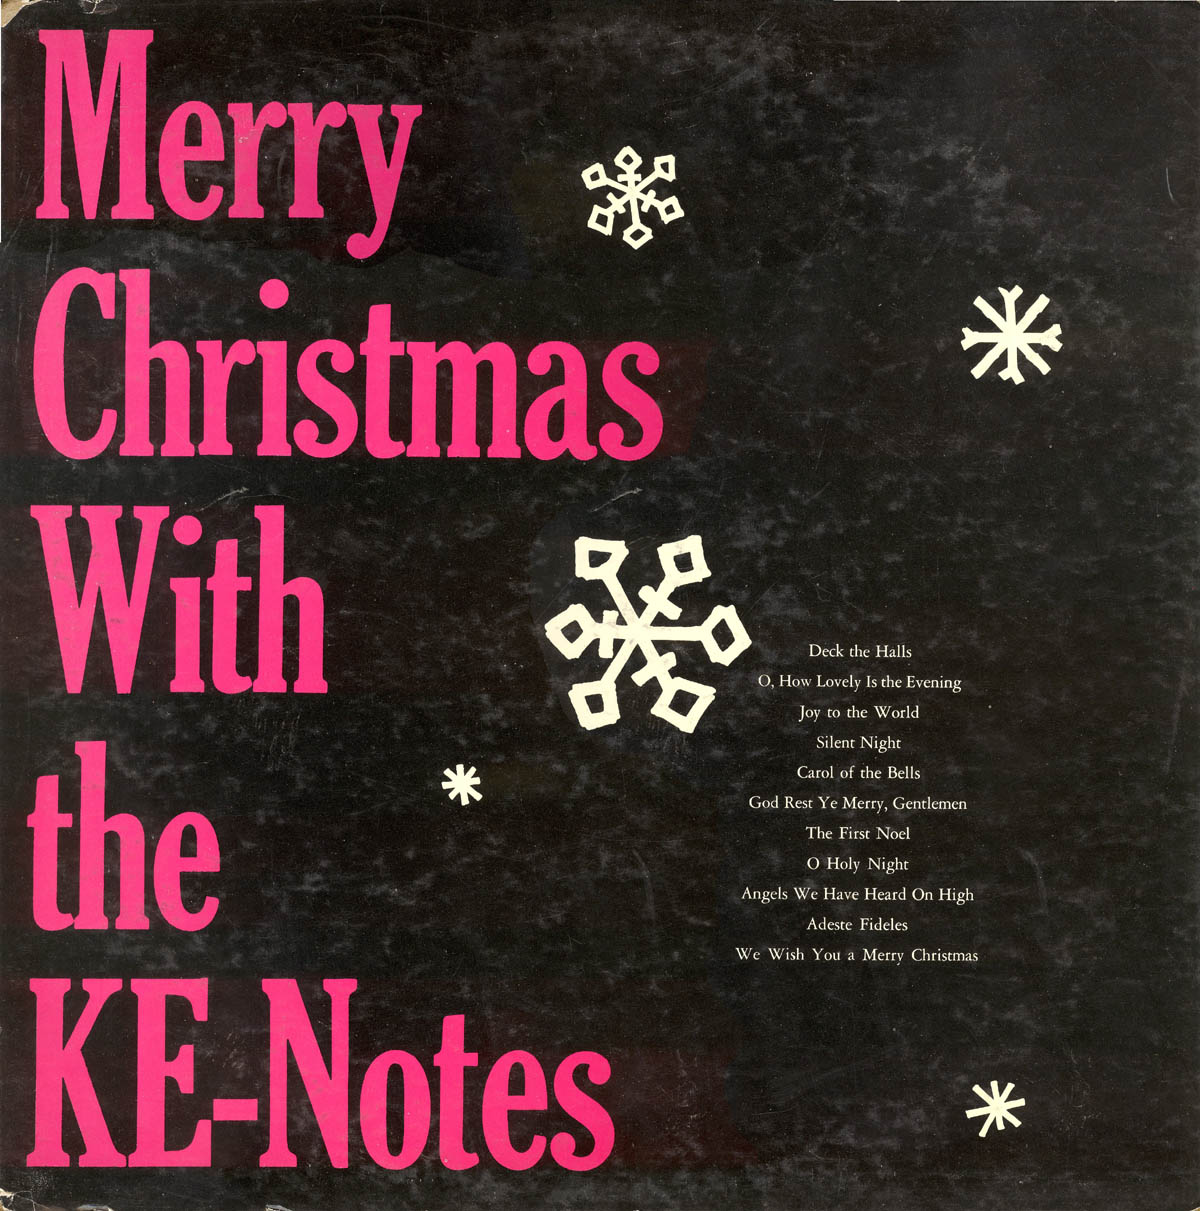 [Merry+Christmas+With+The+KE-Notes-Smaller.jpg]